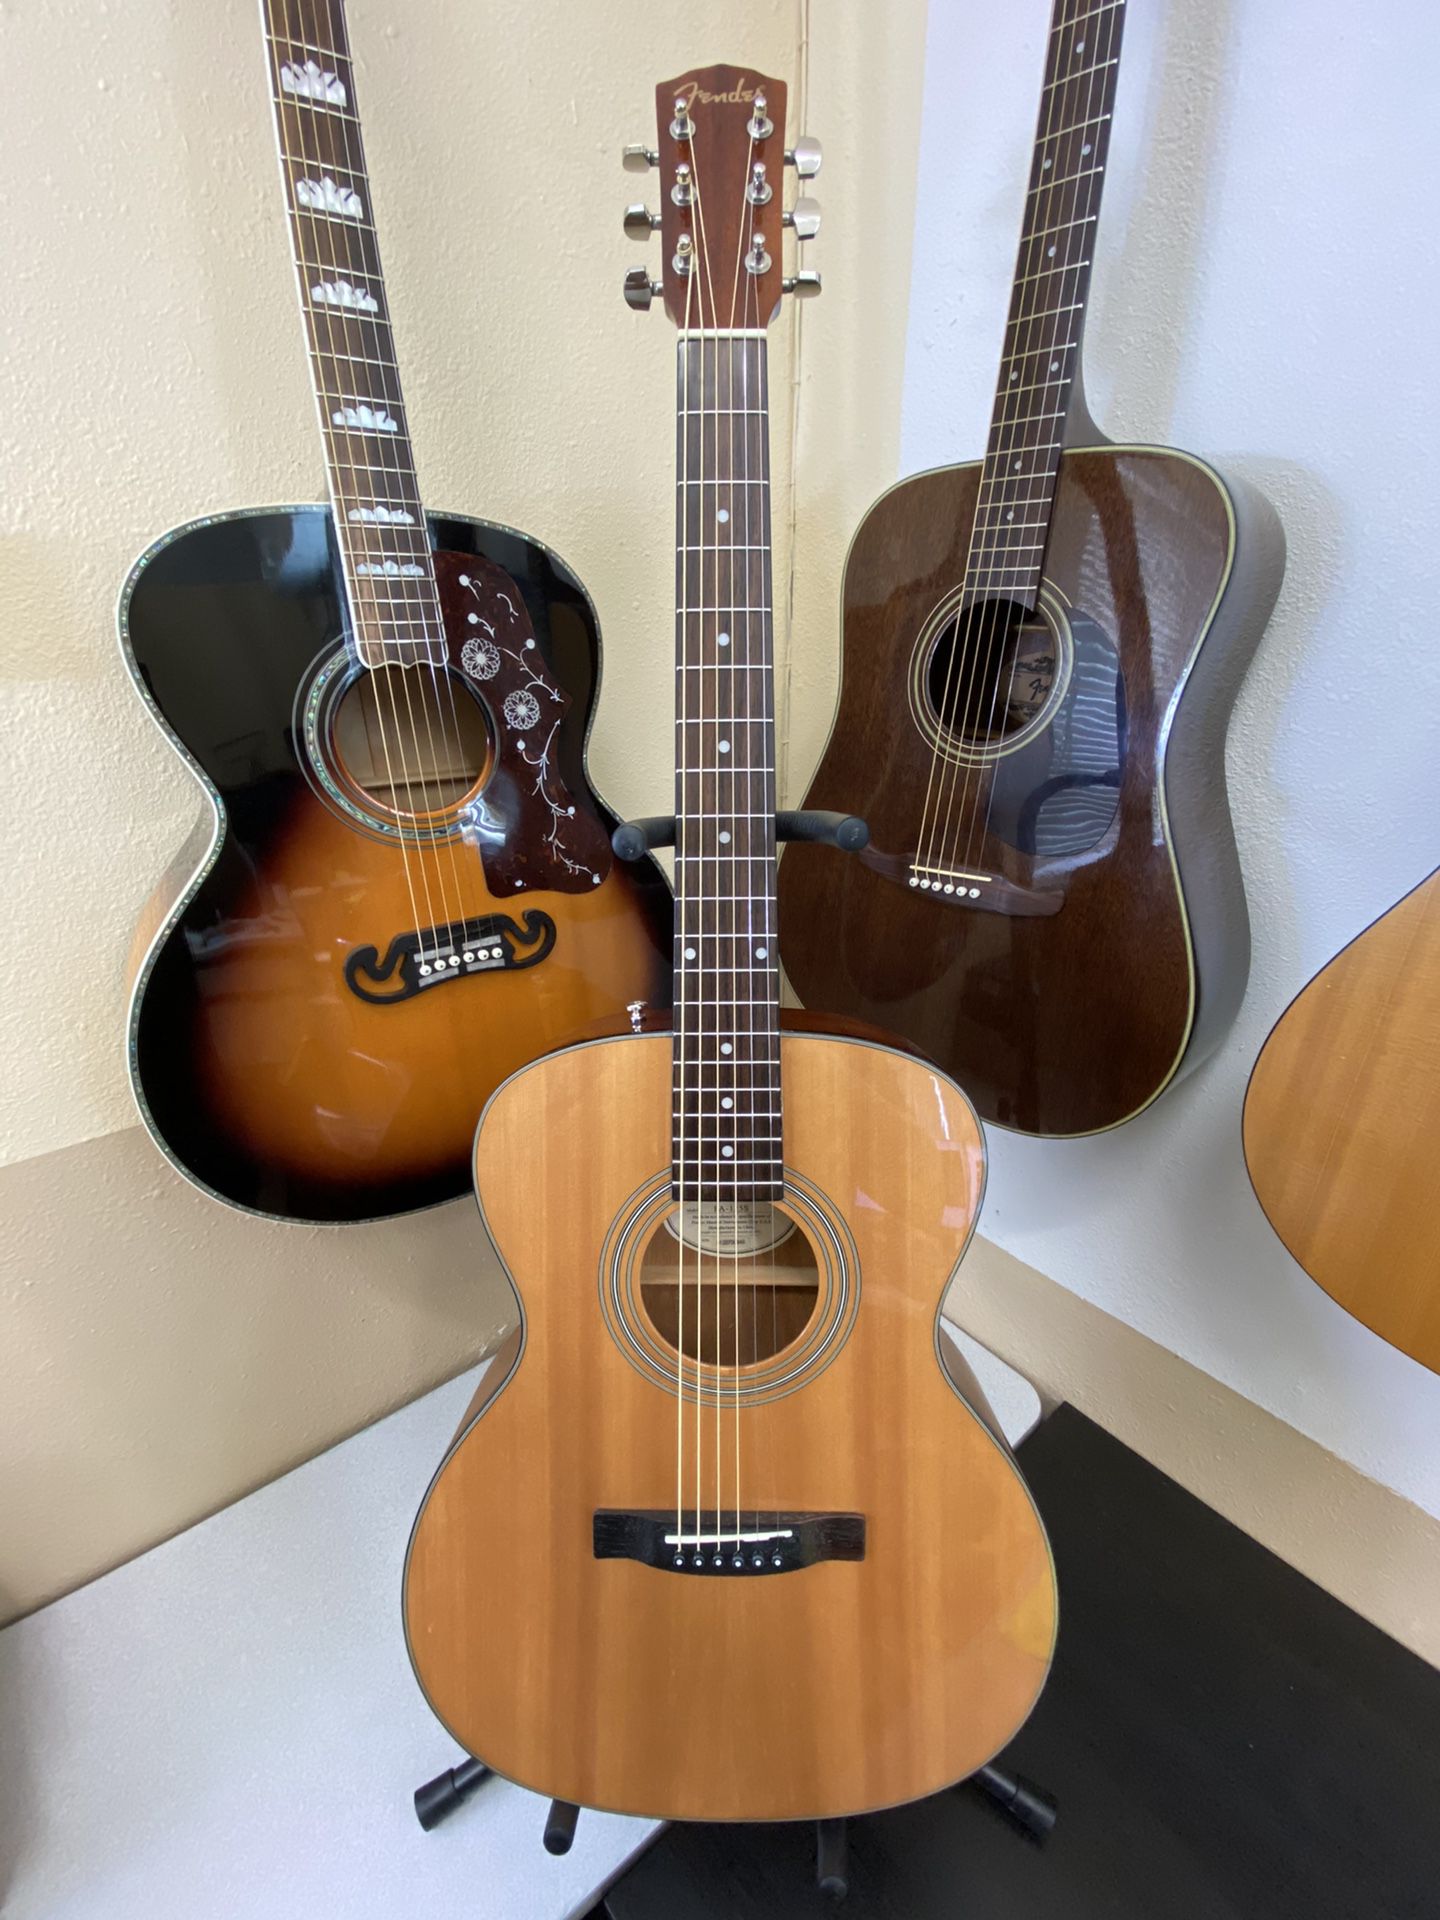 Fender Acoustic Dreadnought Guitar Loud Resonance for size Like New comes w/ Case New Strings